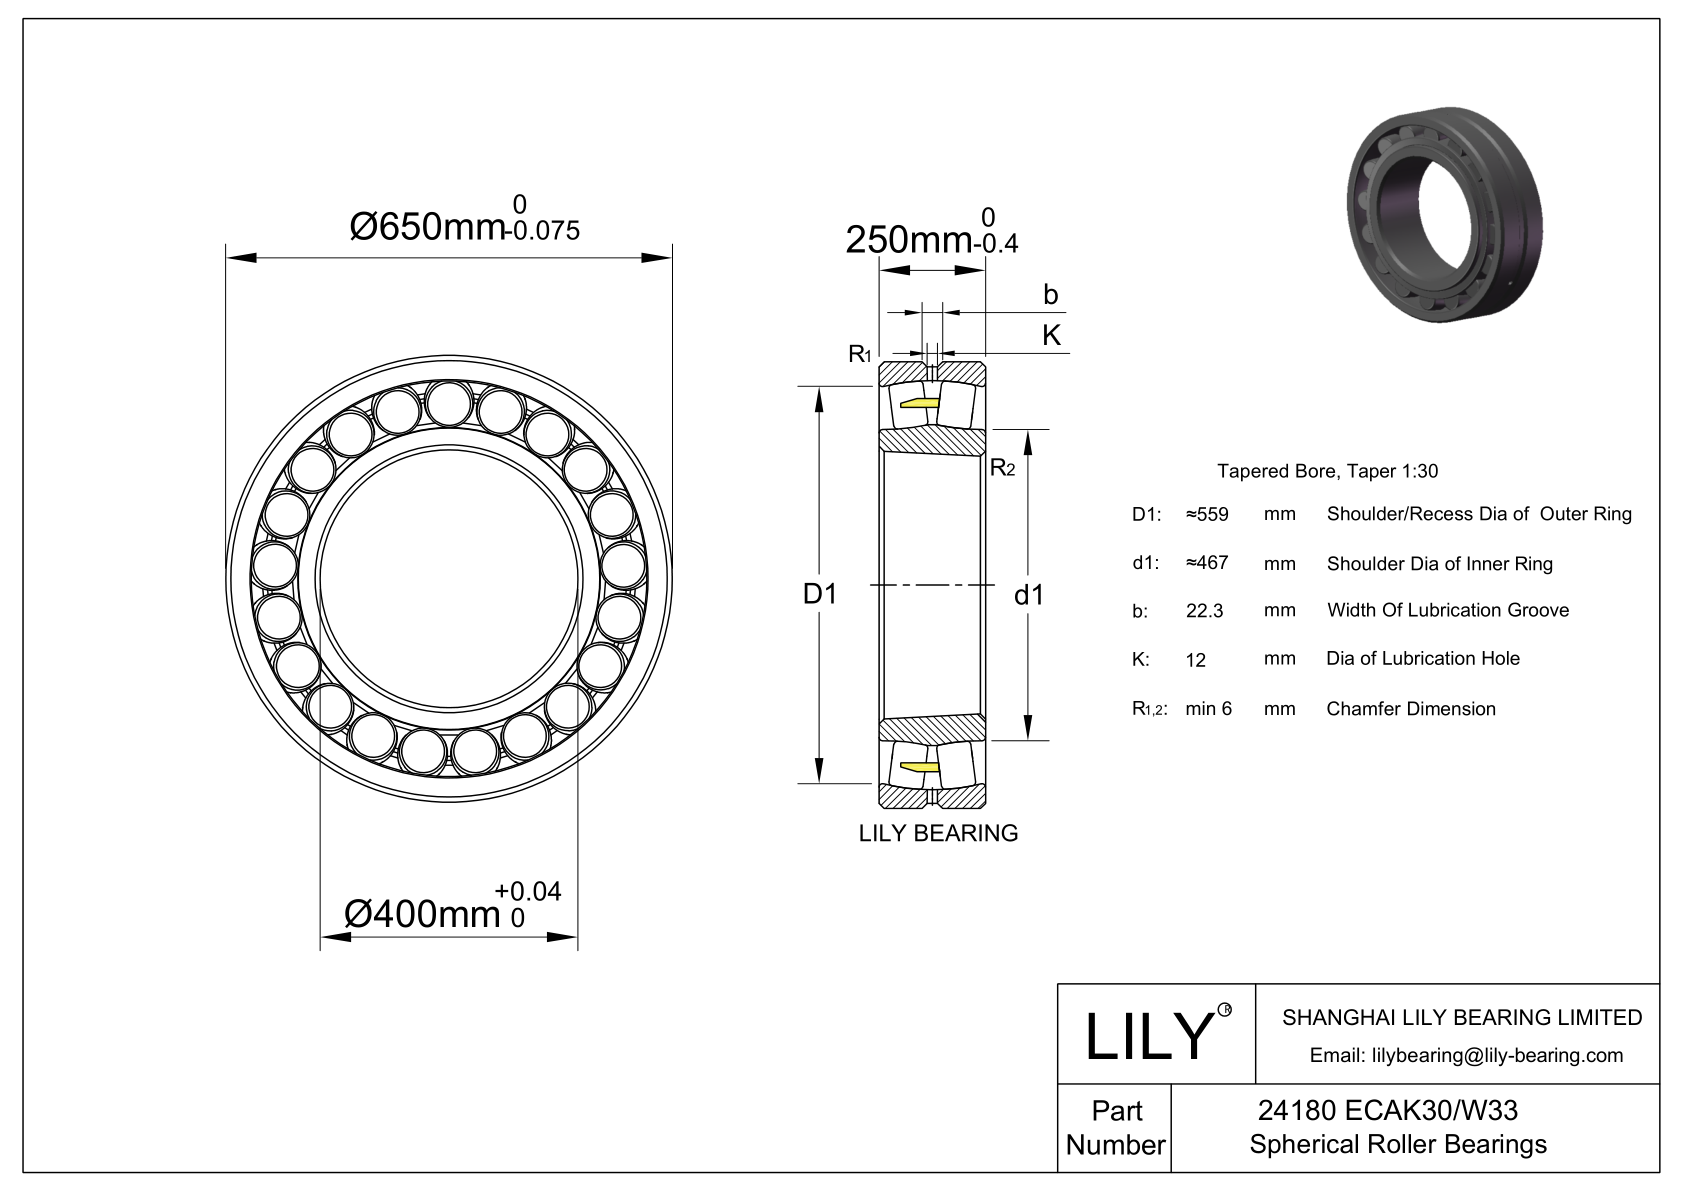 24180 ECAK30/W33 Double Row Spherical Roller Bearing cad drawing